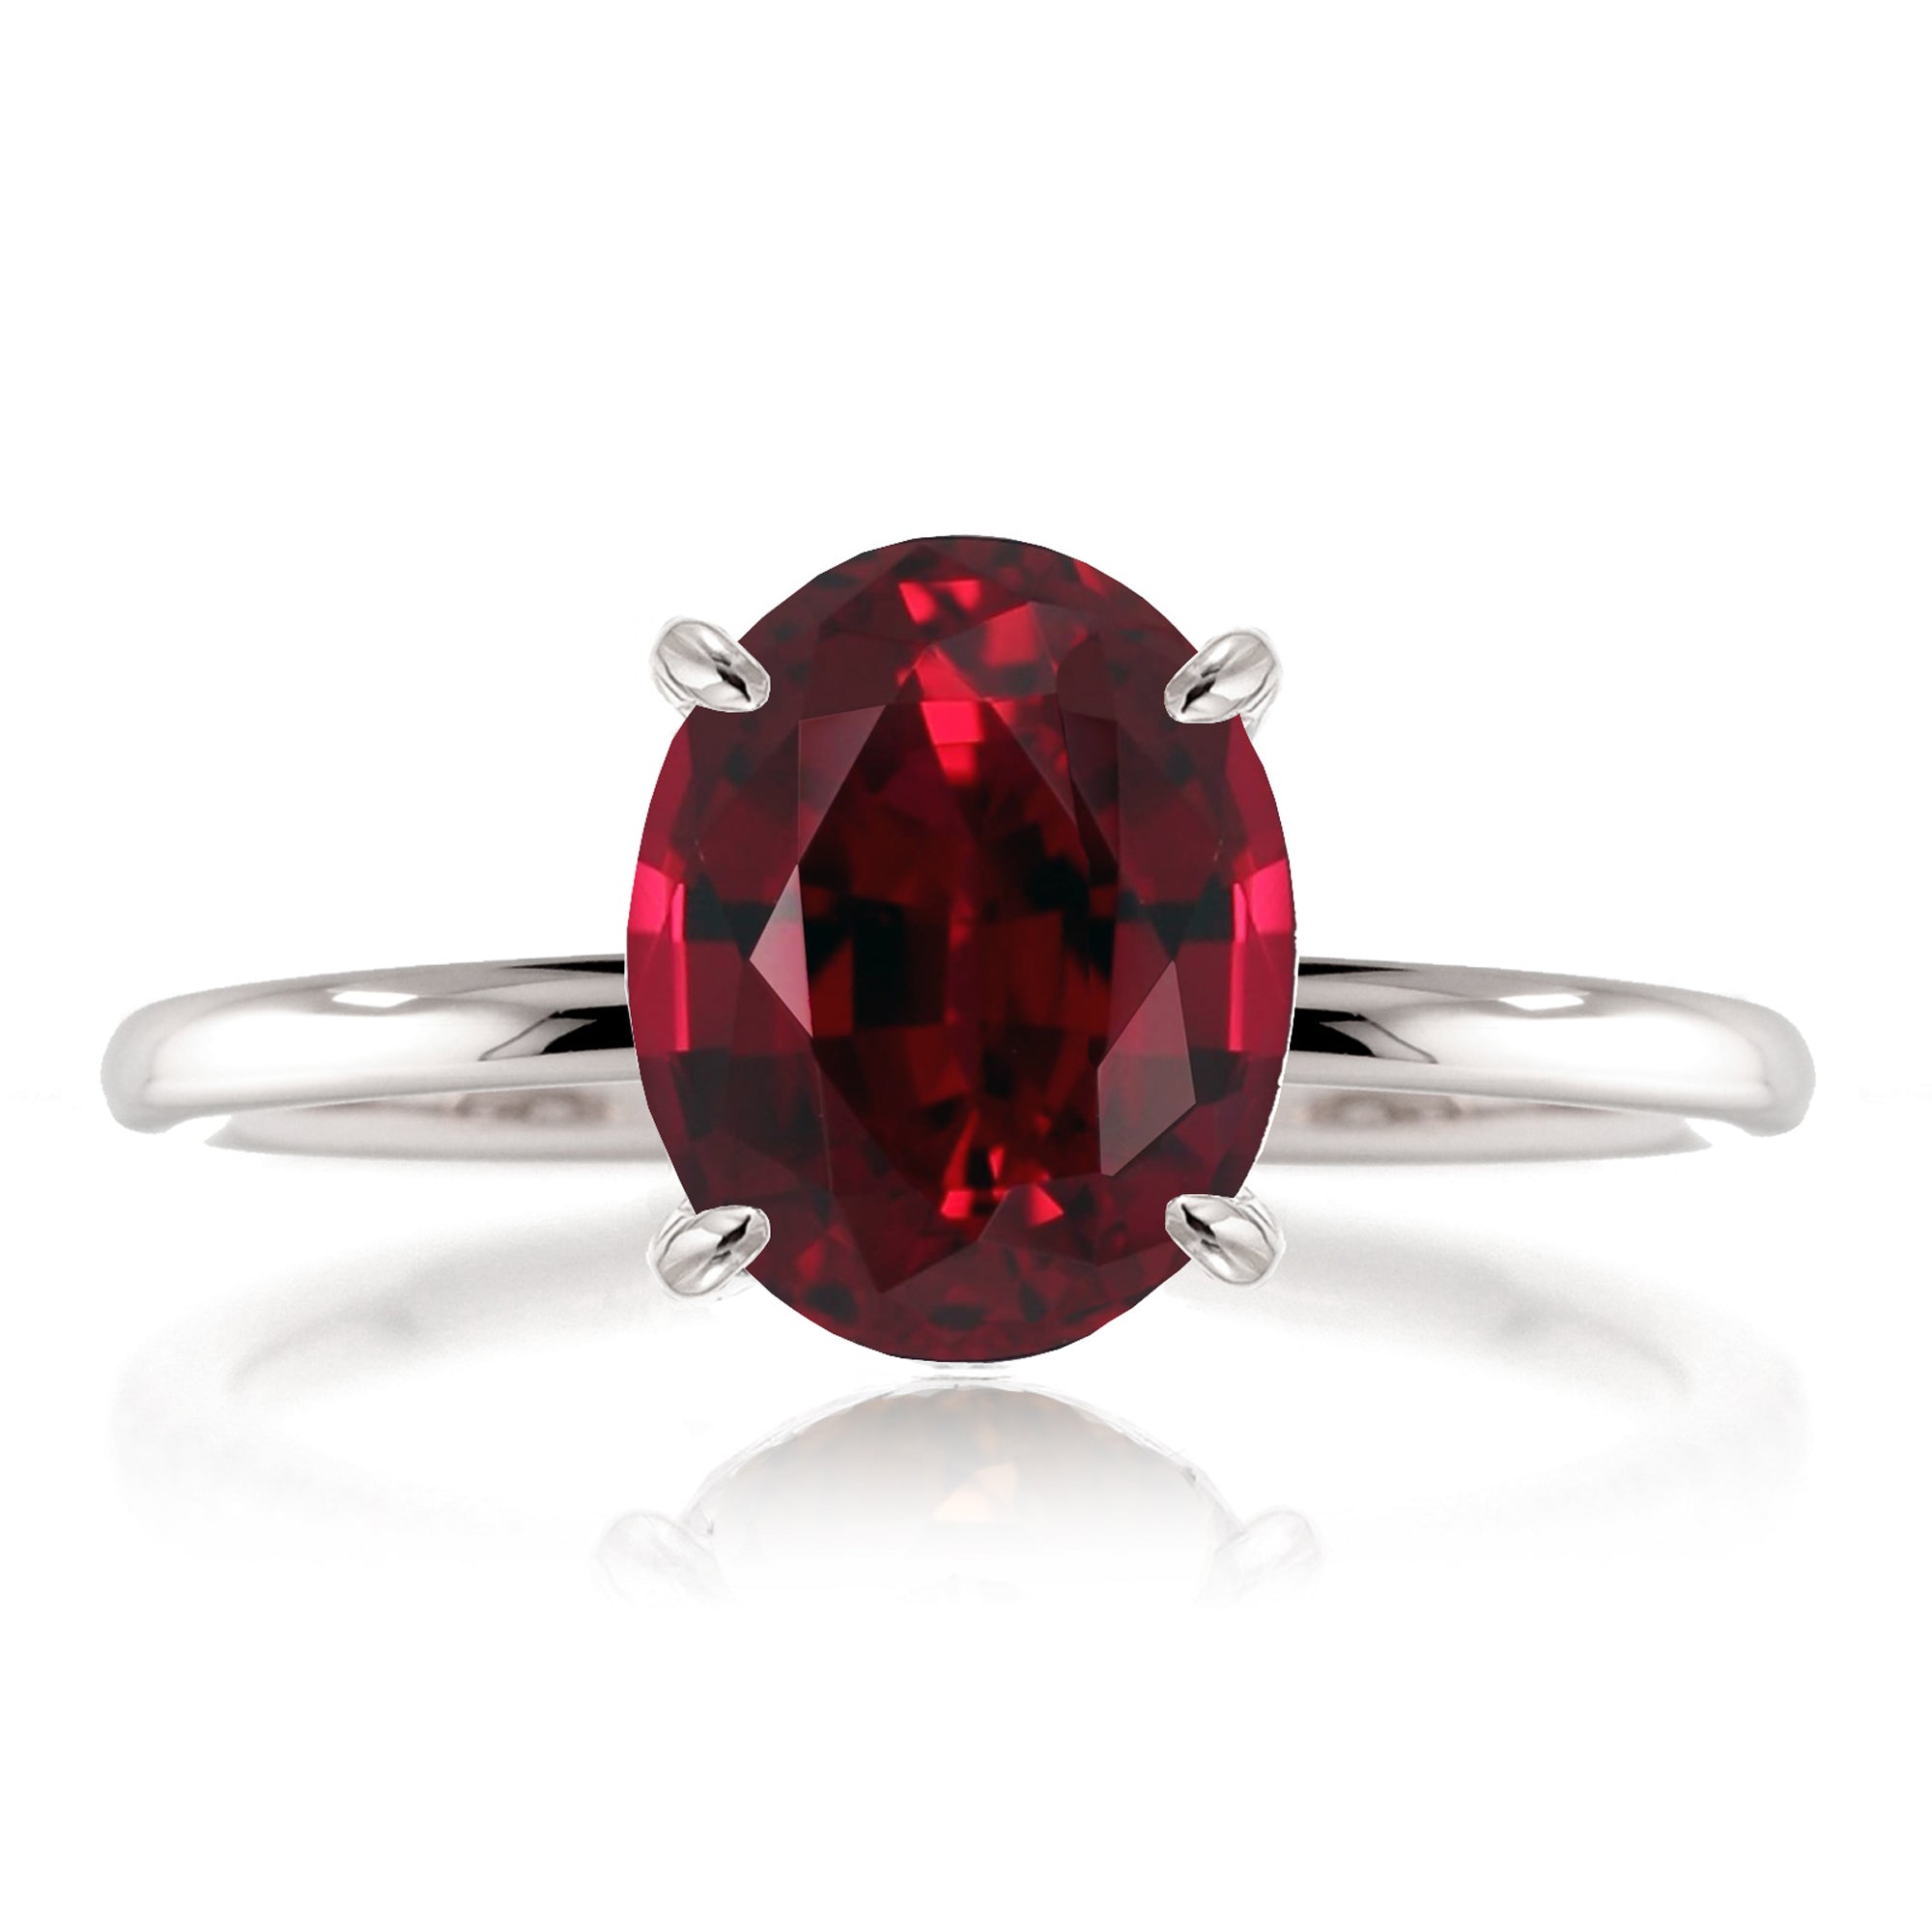 Oval lab-grown ruby solid band engagement ring white gold - the Ava